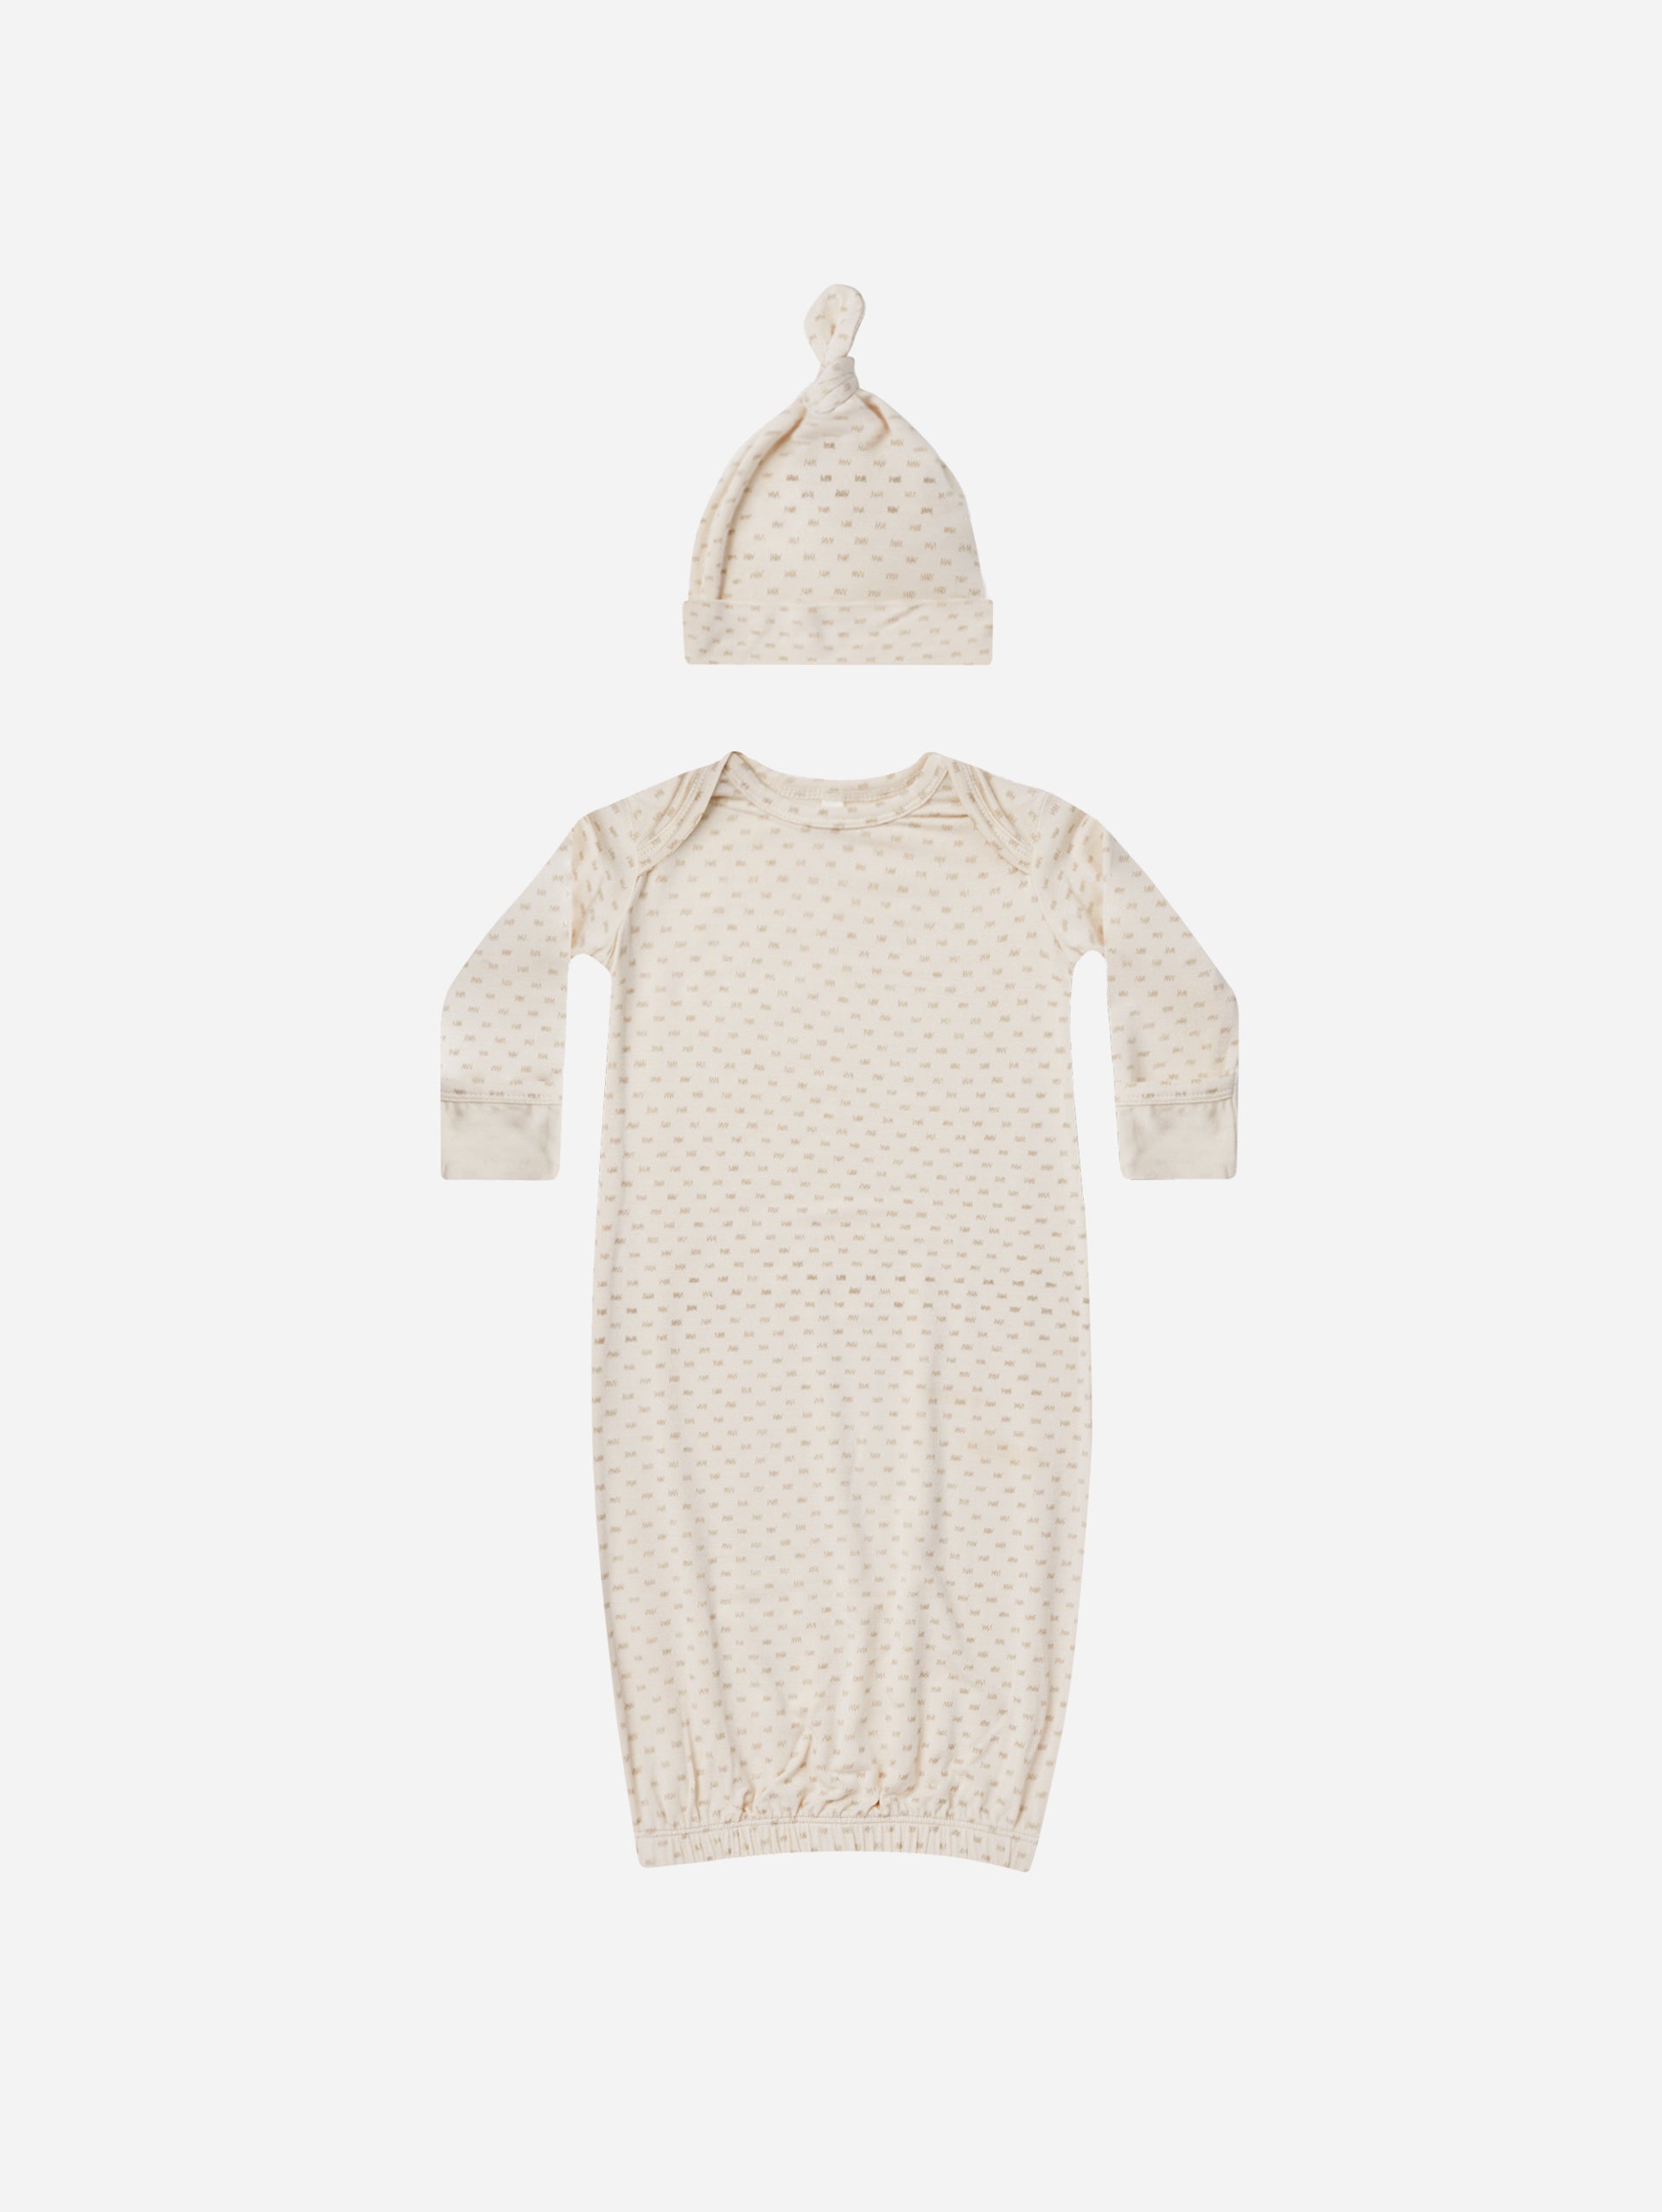 Knotted Baby Gown + Hat Set || Oat Check - Rylee + Cru | Kids Clothes | Trendy Baby Clothes | Modern Infant Outfits |